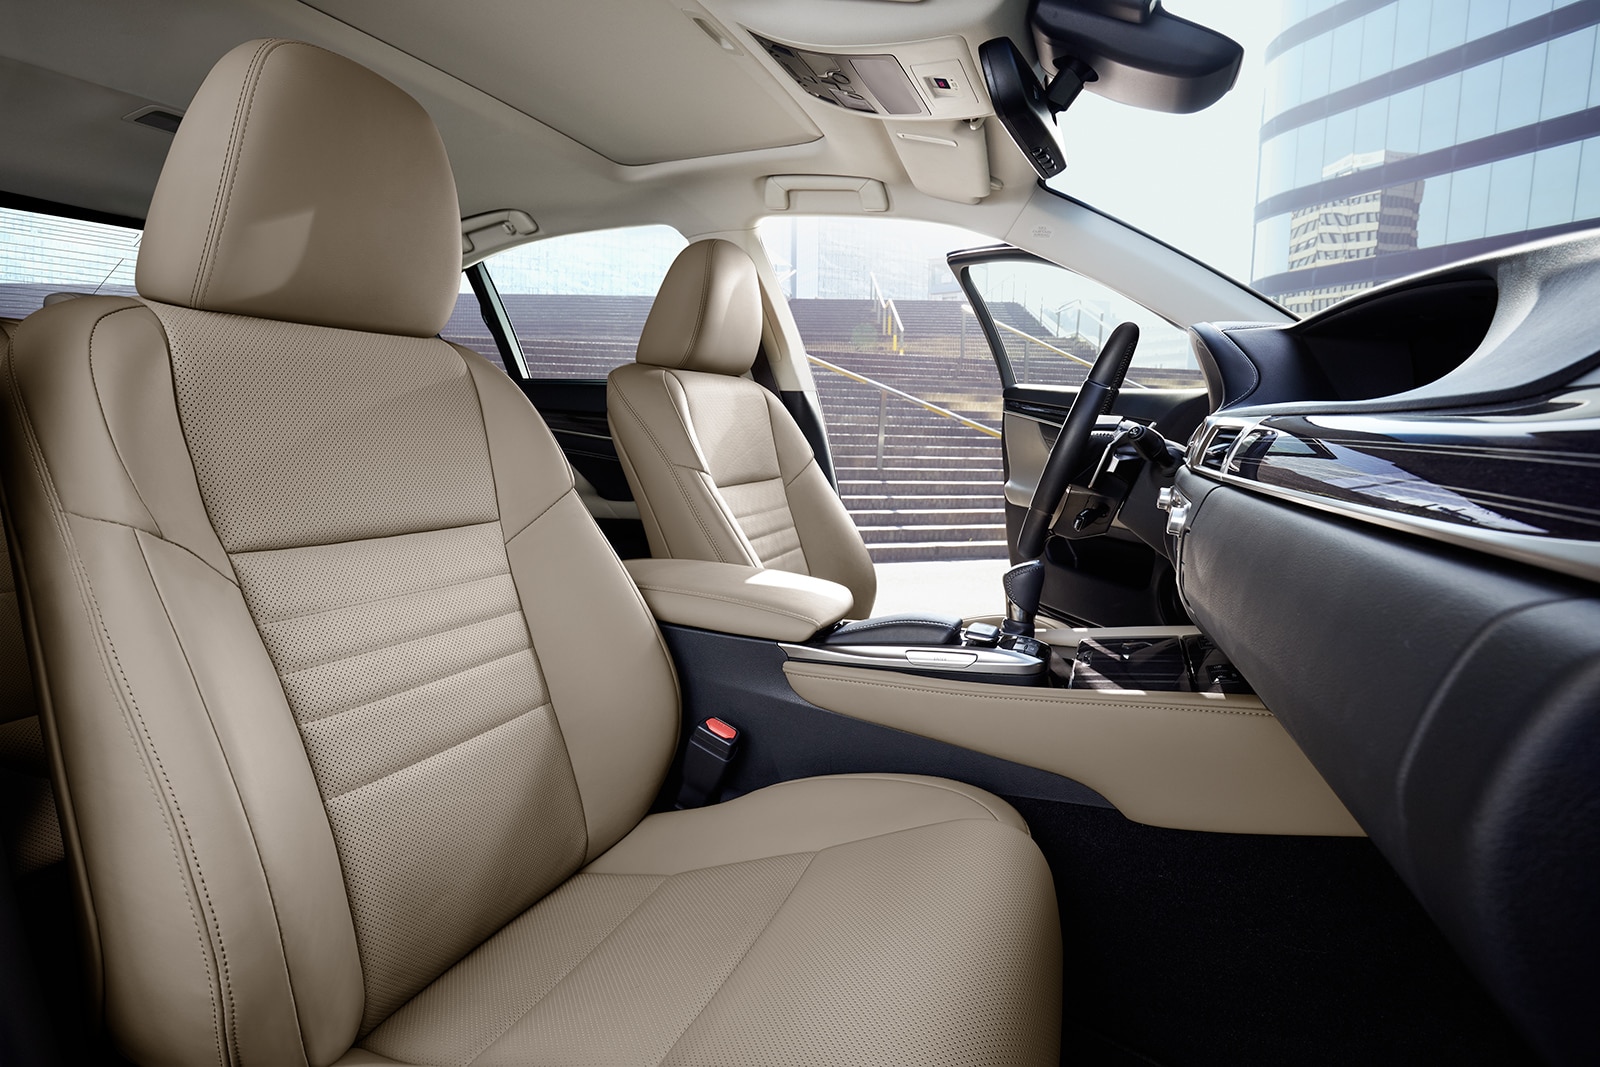 Model features of the 2020 Lexus GS and GS F Sport at Bobby Rahal Lexus of Lewistown | The beige interior of the Lexus GS 350